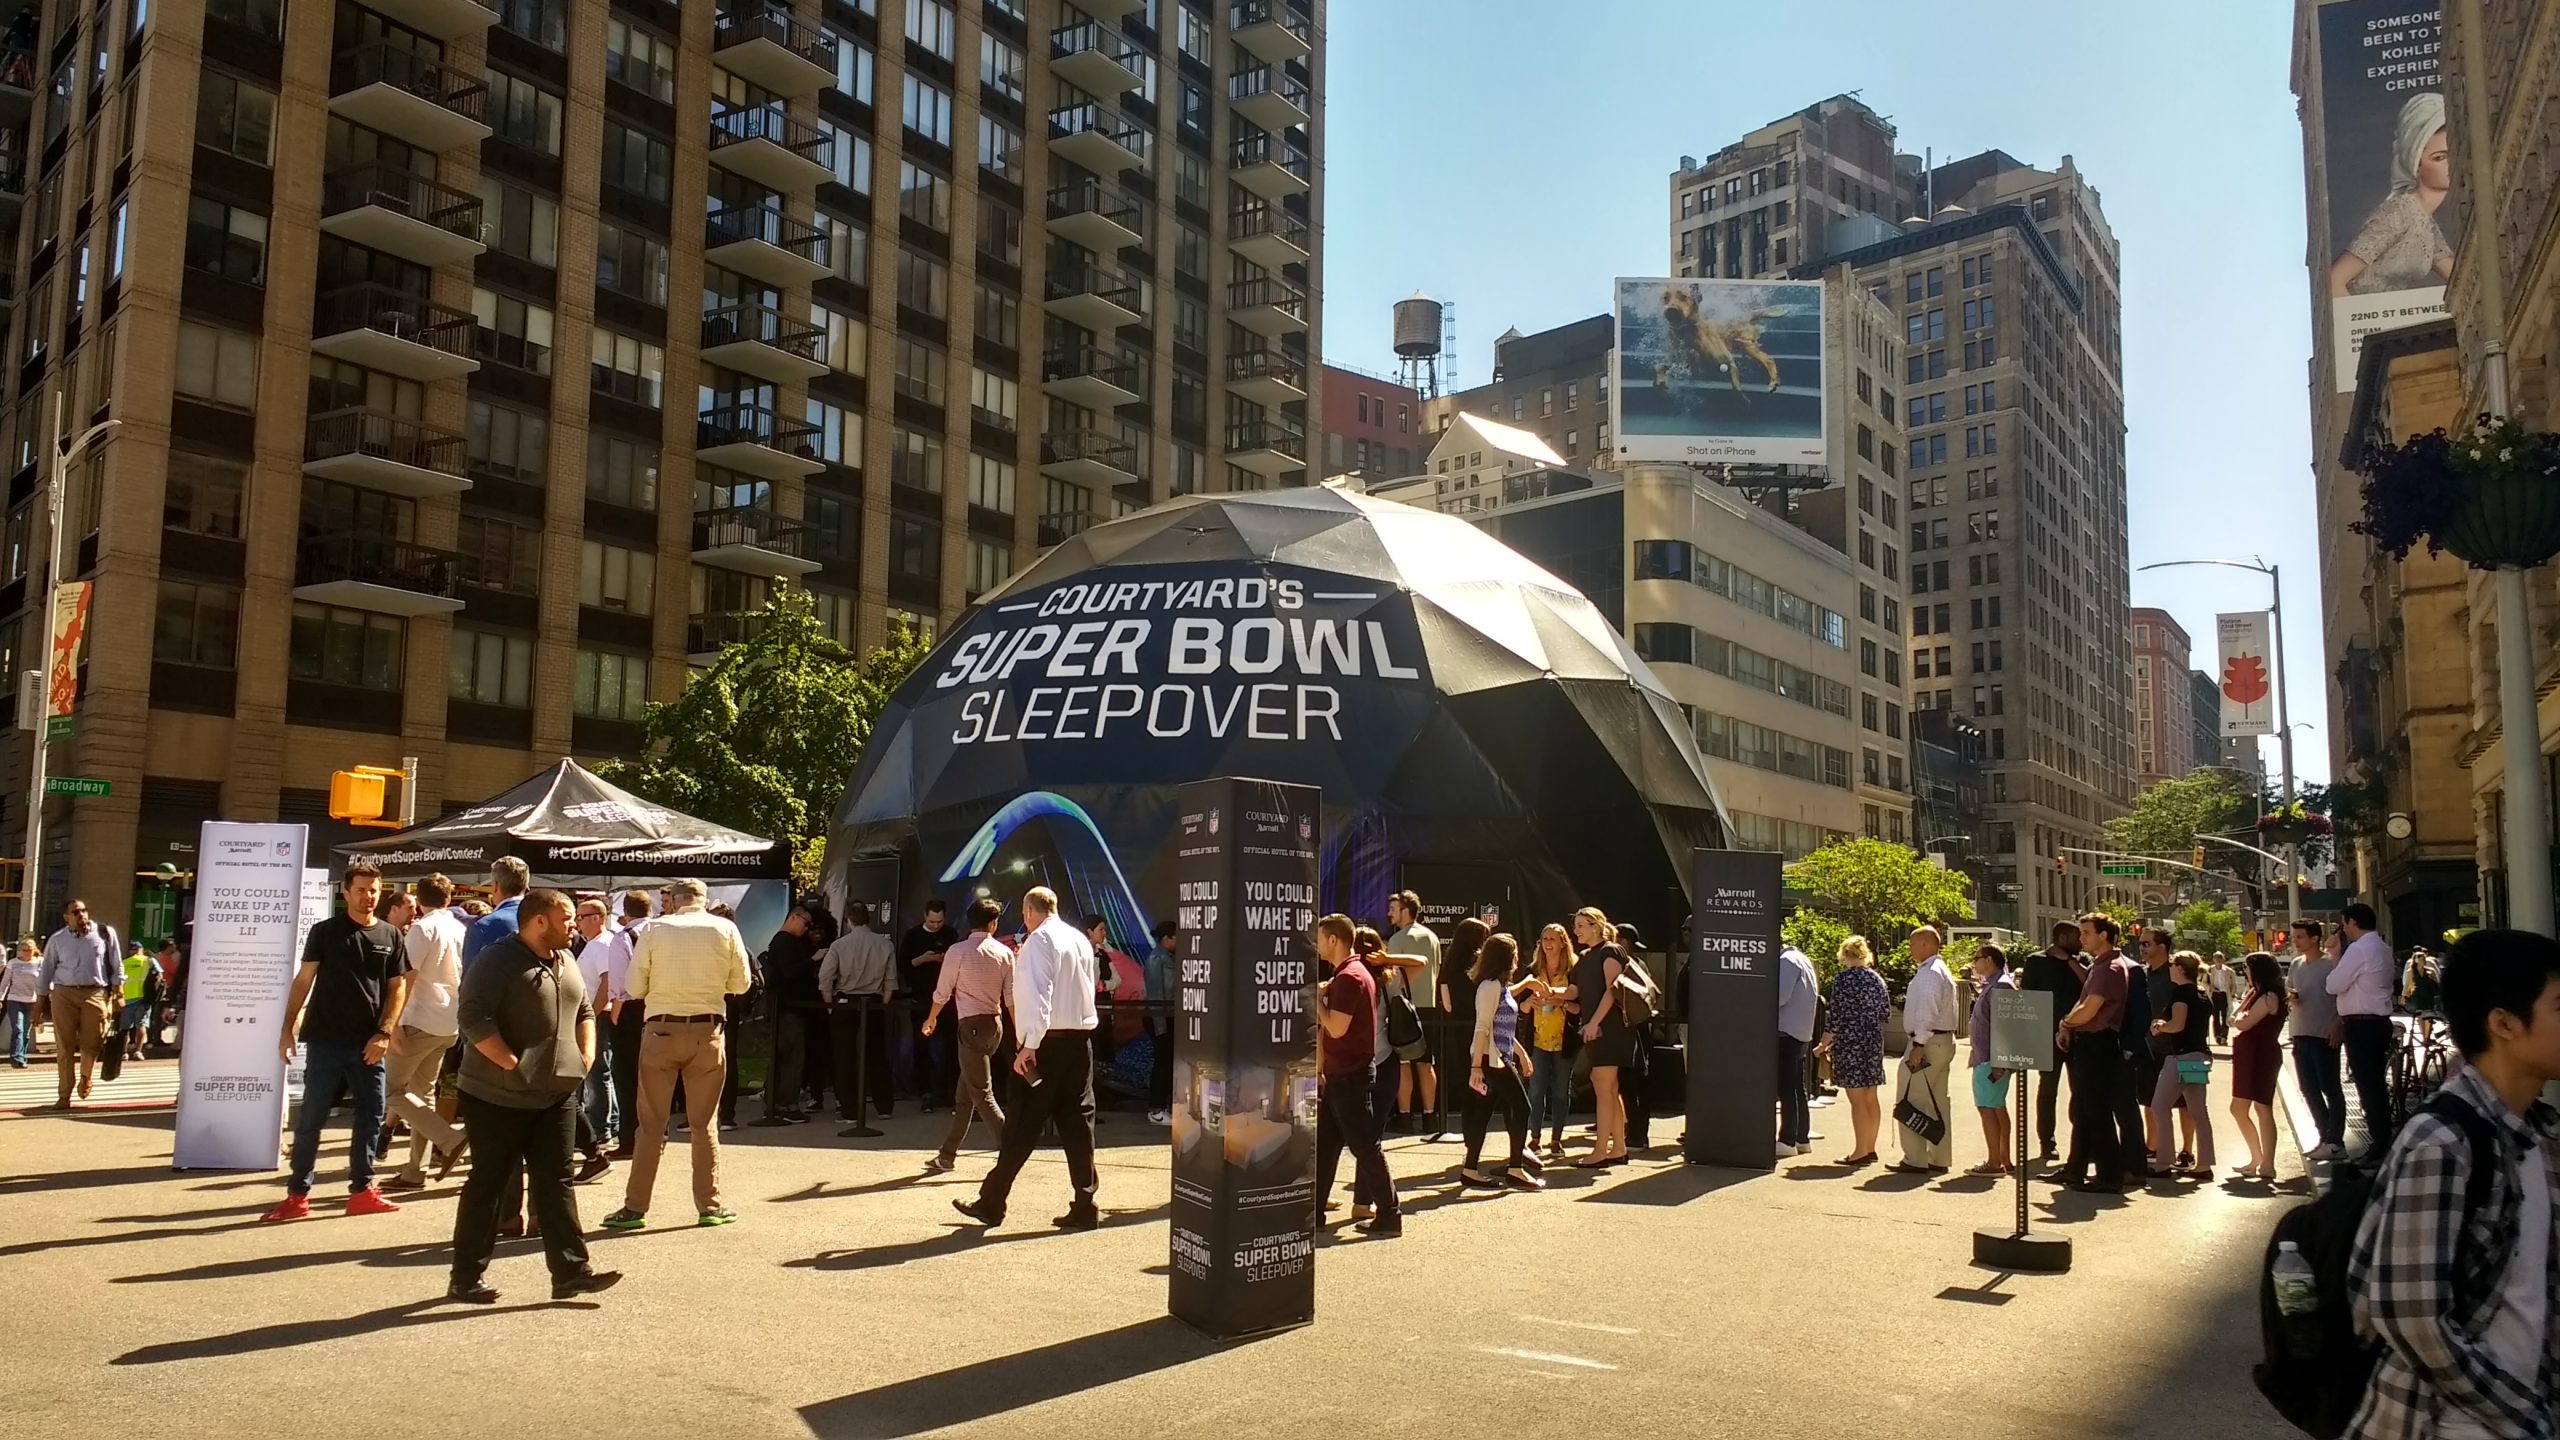 A Courtyard Marriot branded dome is surrounded by a crowd of people for an NFL super bowl activation